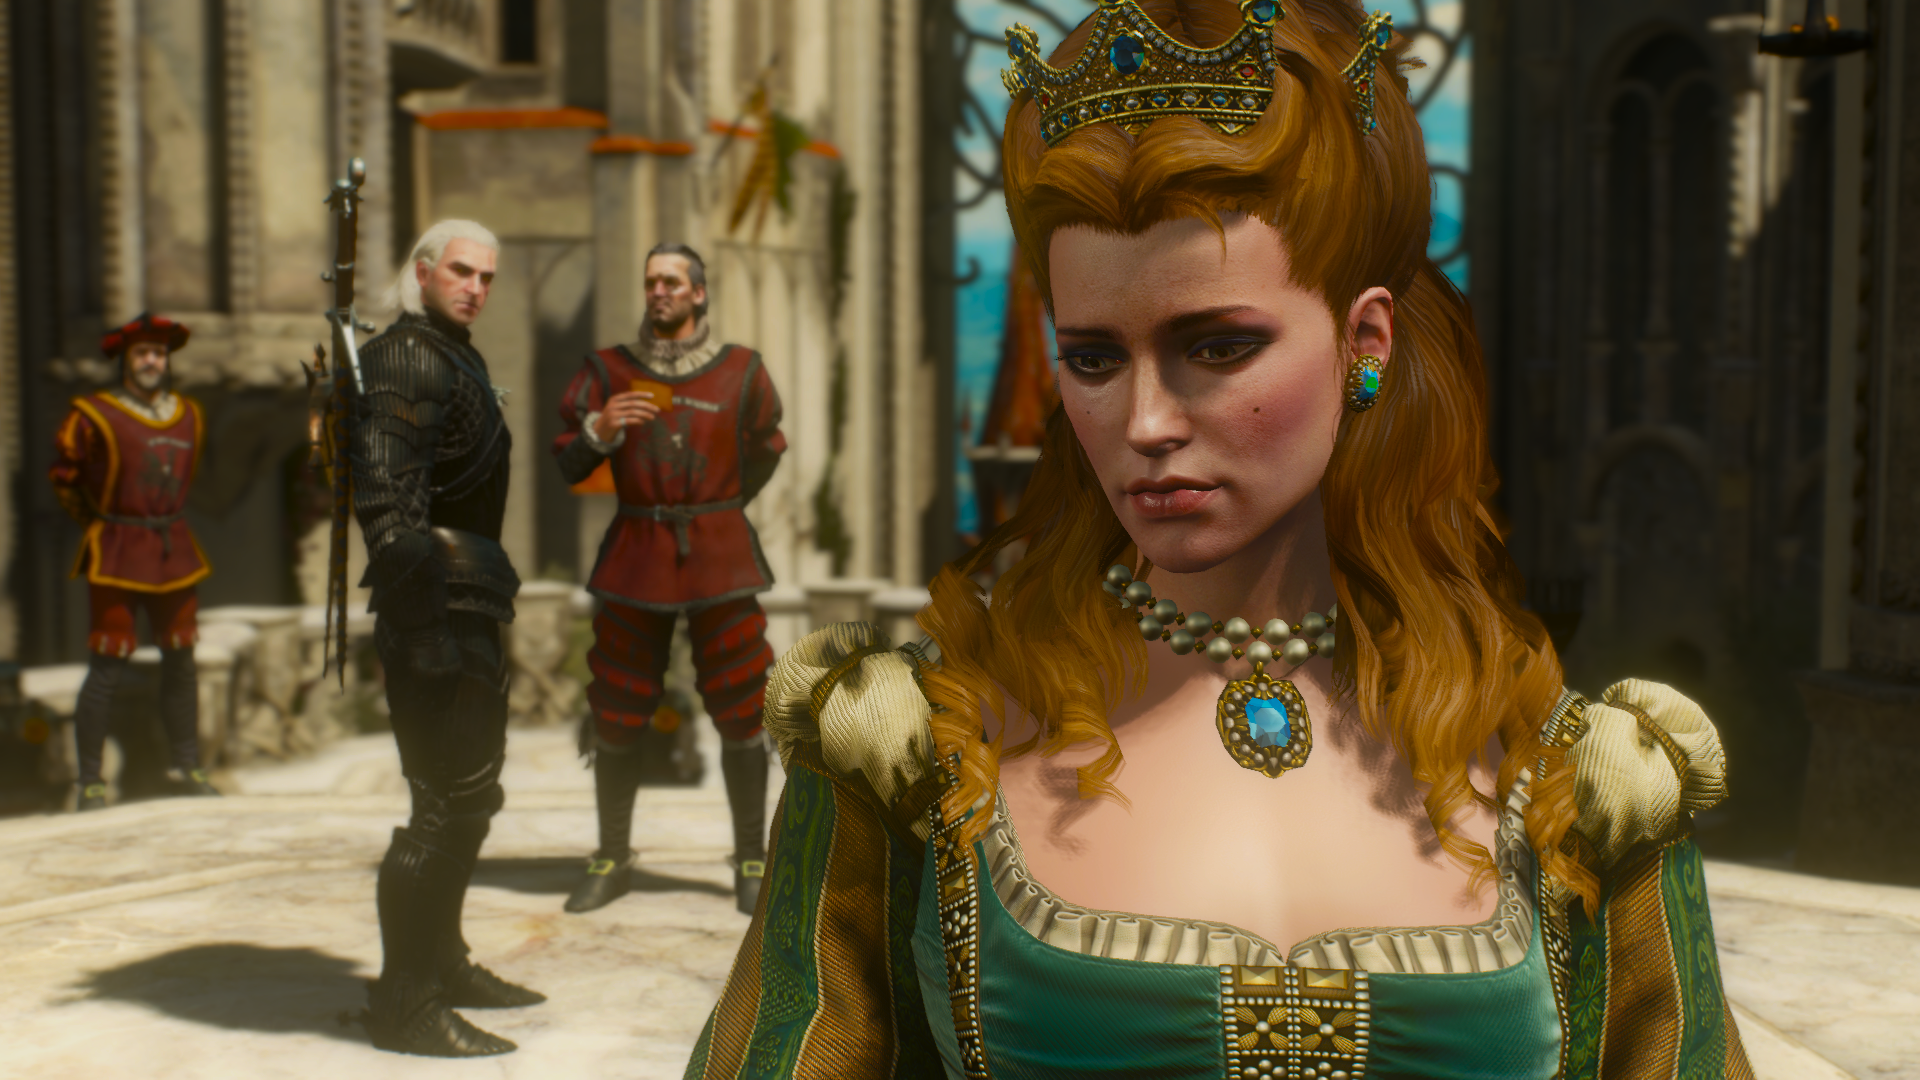 General 1920x1080 The Witcher The Witcher 3: Wild Hunt - Blood and Wine The Witcher 3: Wild Hunt Anna Henrietta video game characters women crown modding